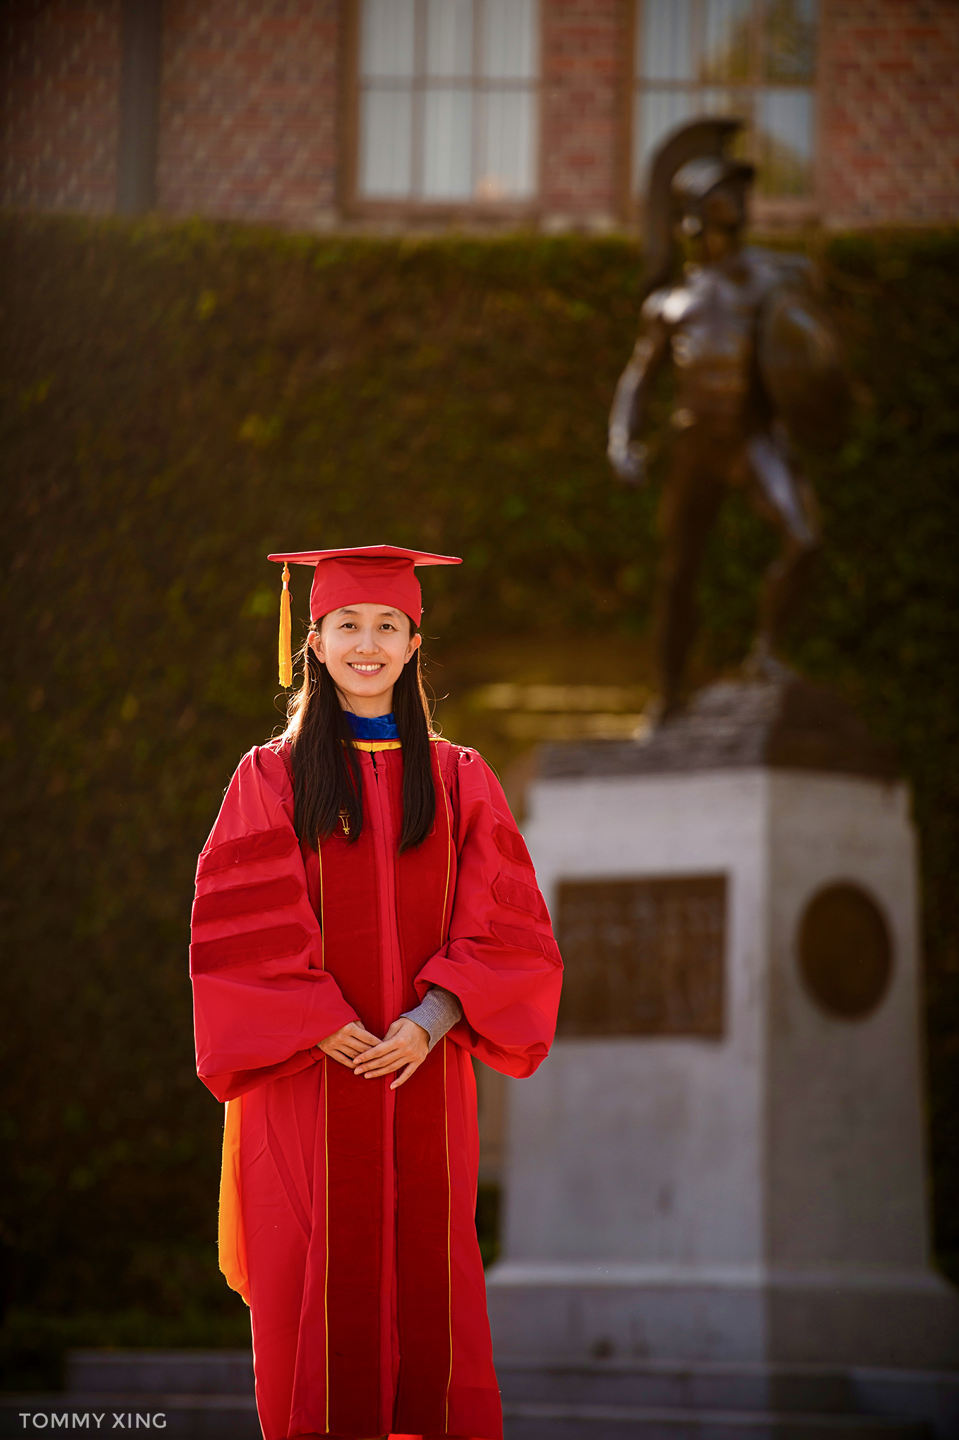 Graduation portrait photography - USC - Los Angeles - Tommy Xing Photography 04.jpg